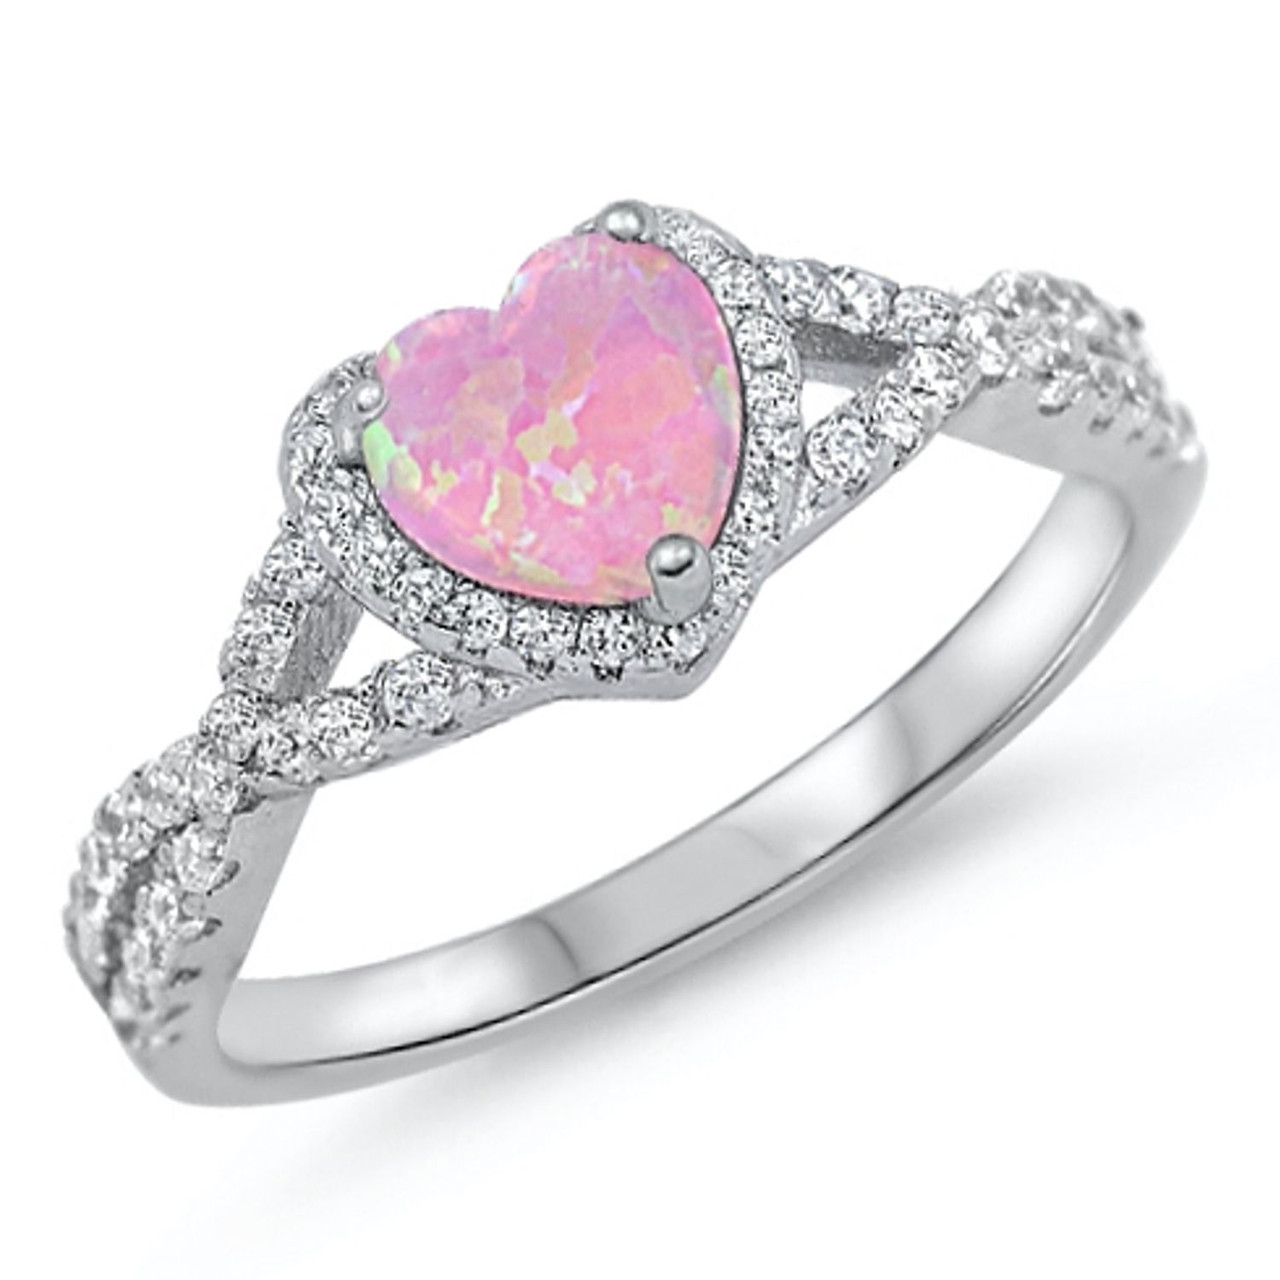 Personalized, Engraved Sterling Silver Pink Heart Rings